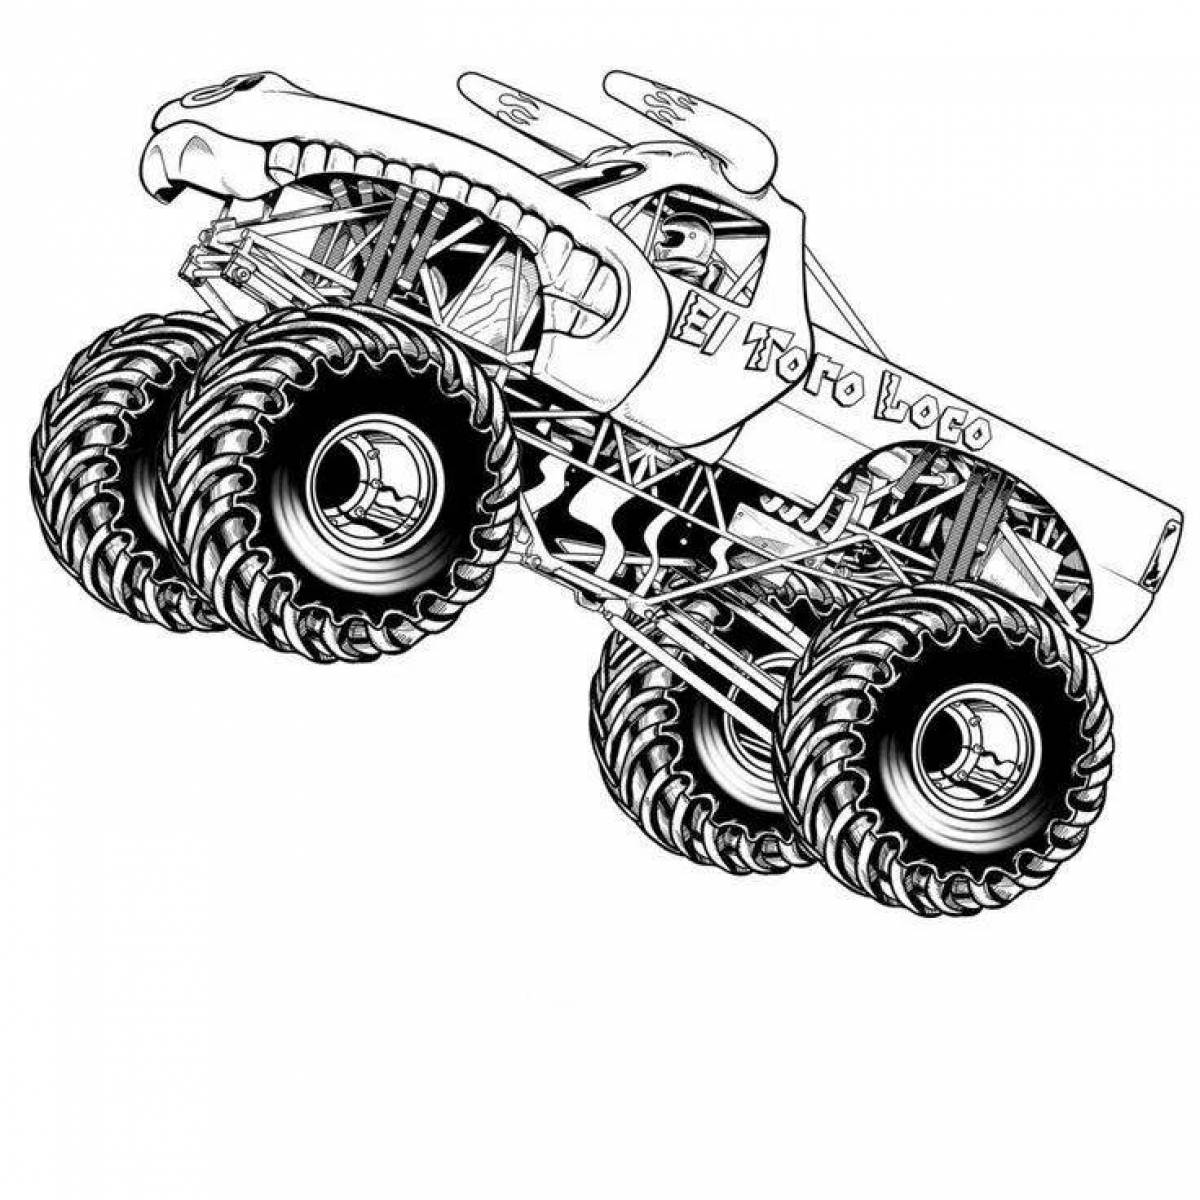 Impressive monster truck hot wheels coloring page